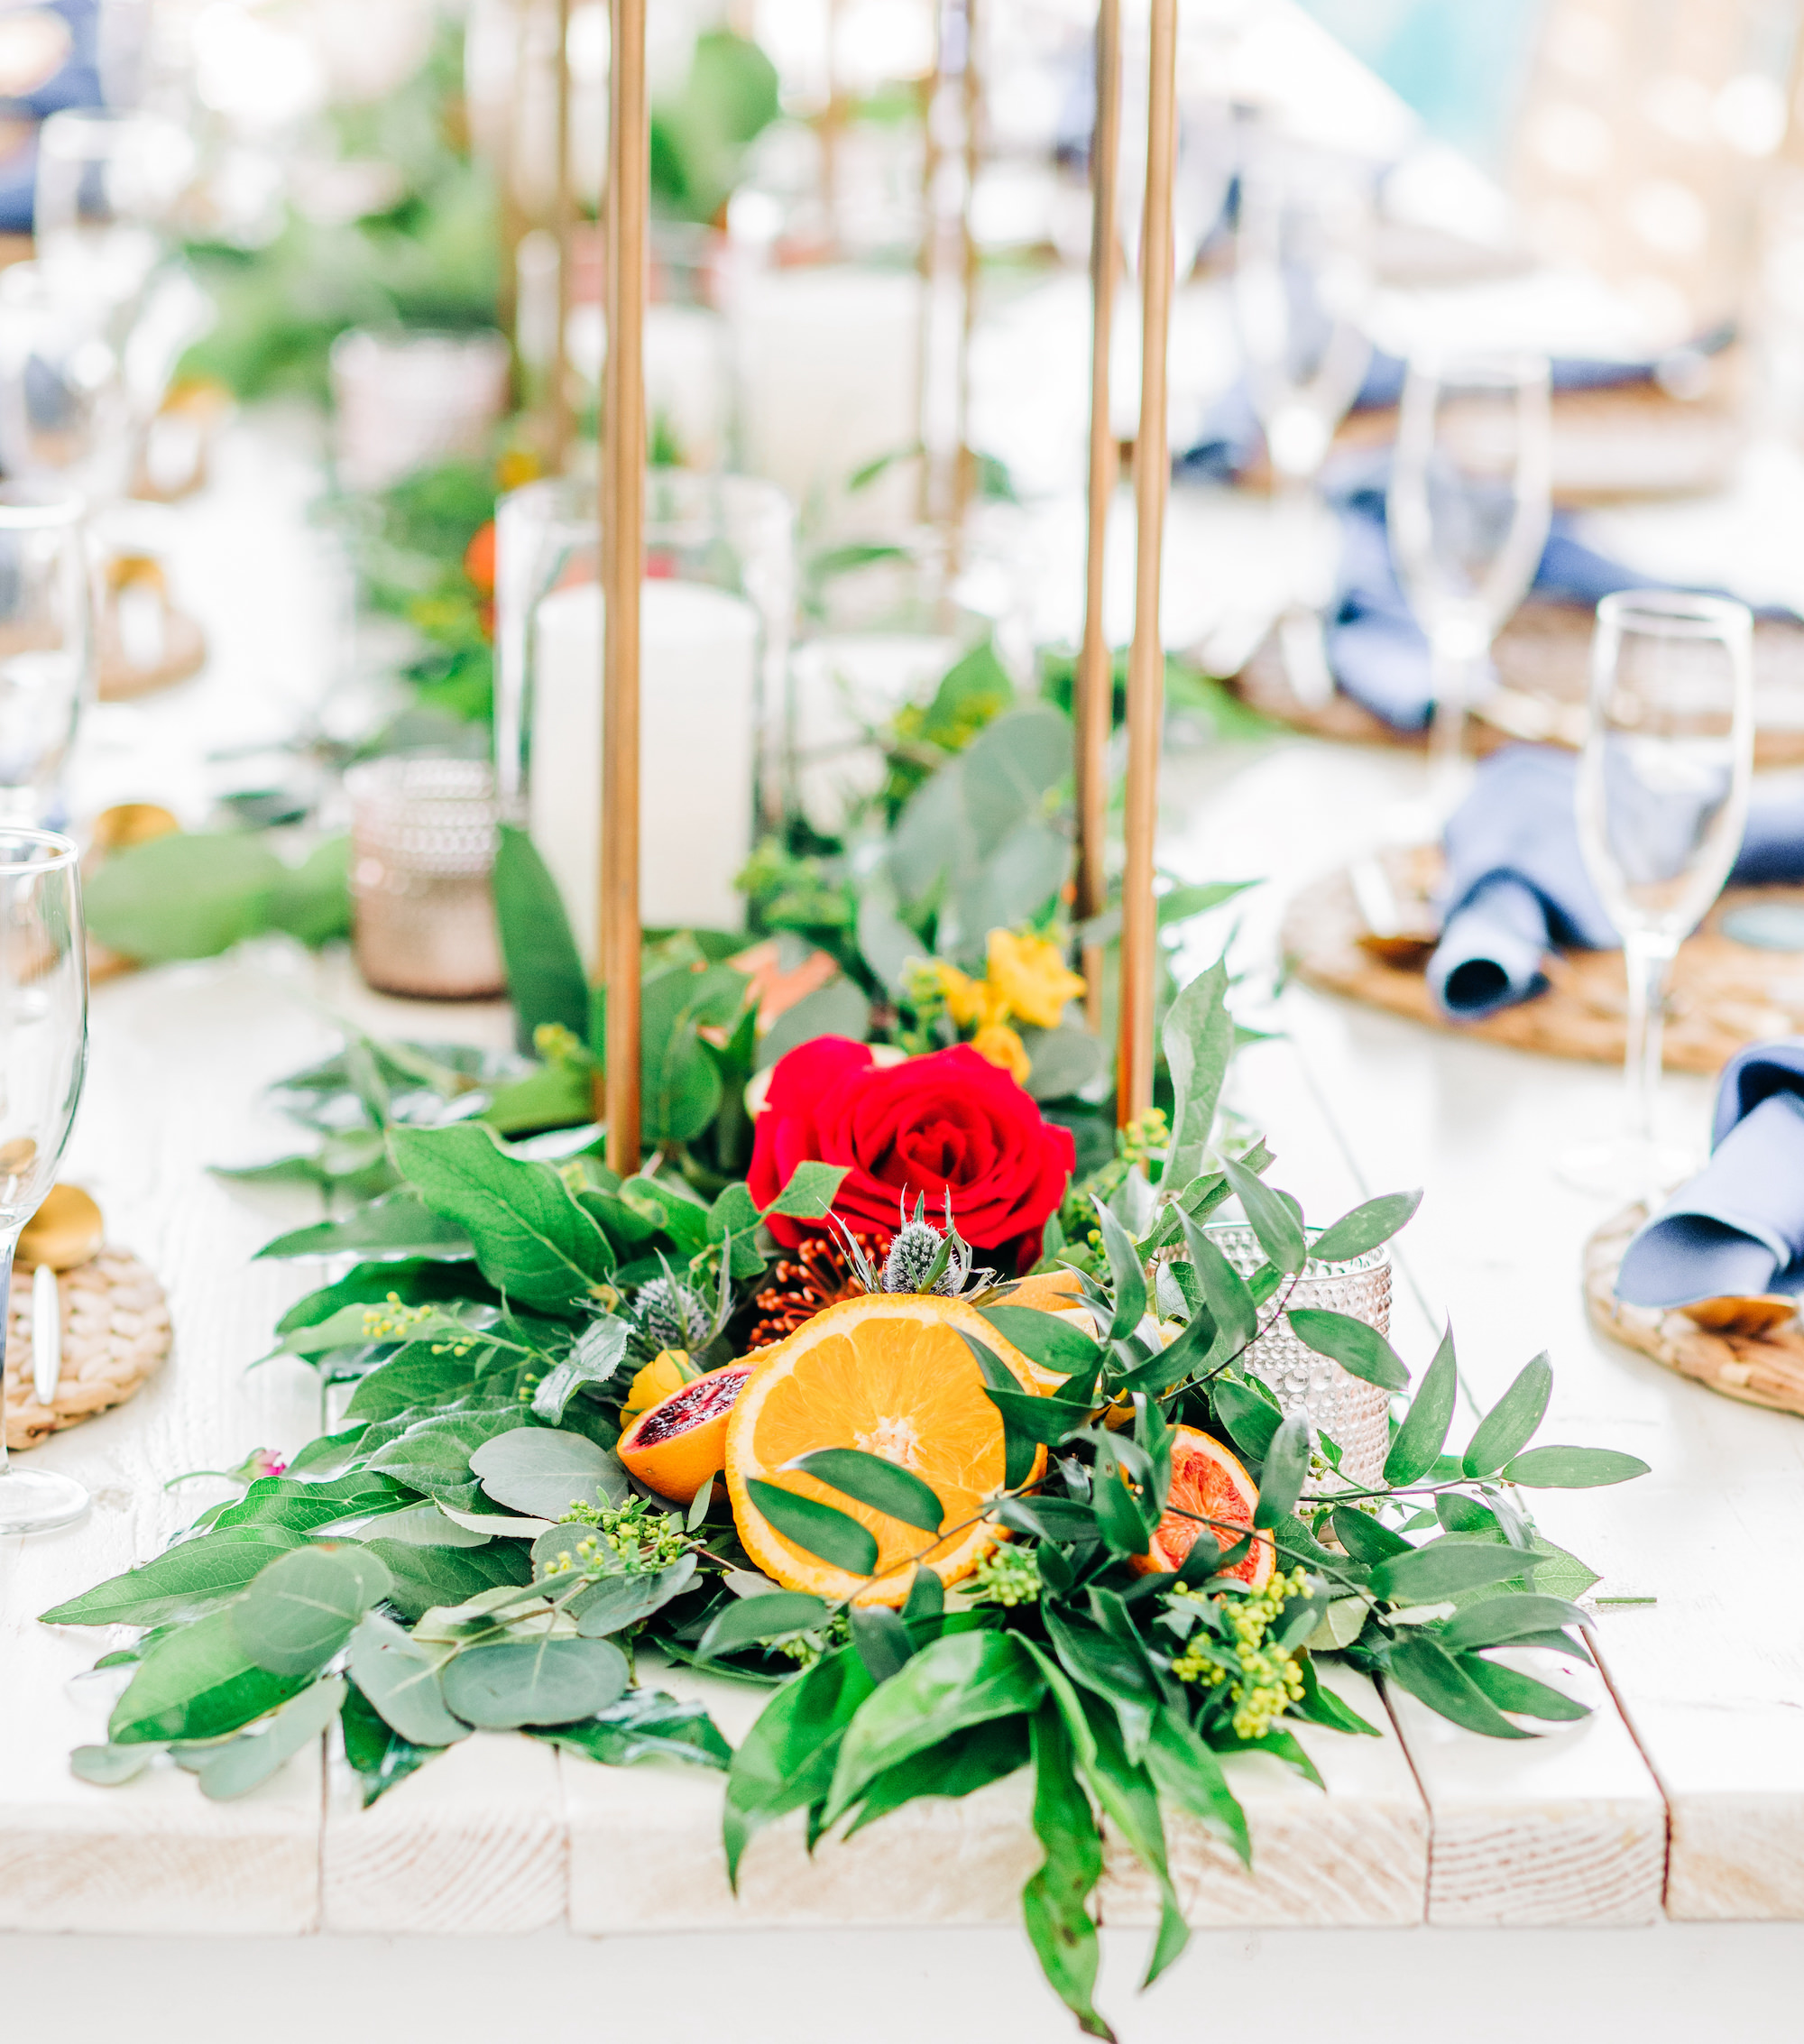 Vibrant Colorful Wedding Reception Decor, Greenery Garland with Sliced Oranges, Blood Oranges and Grapefruit, Red and Yellow Roses | Tampa Bay Wedding Rentals Kate Ryan Event Rentals